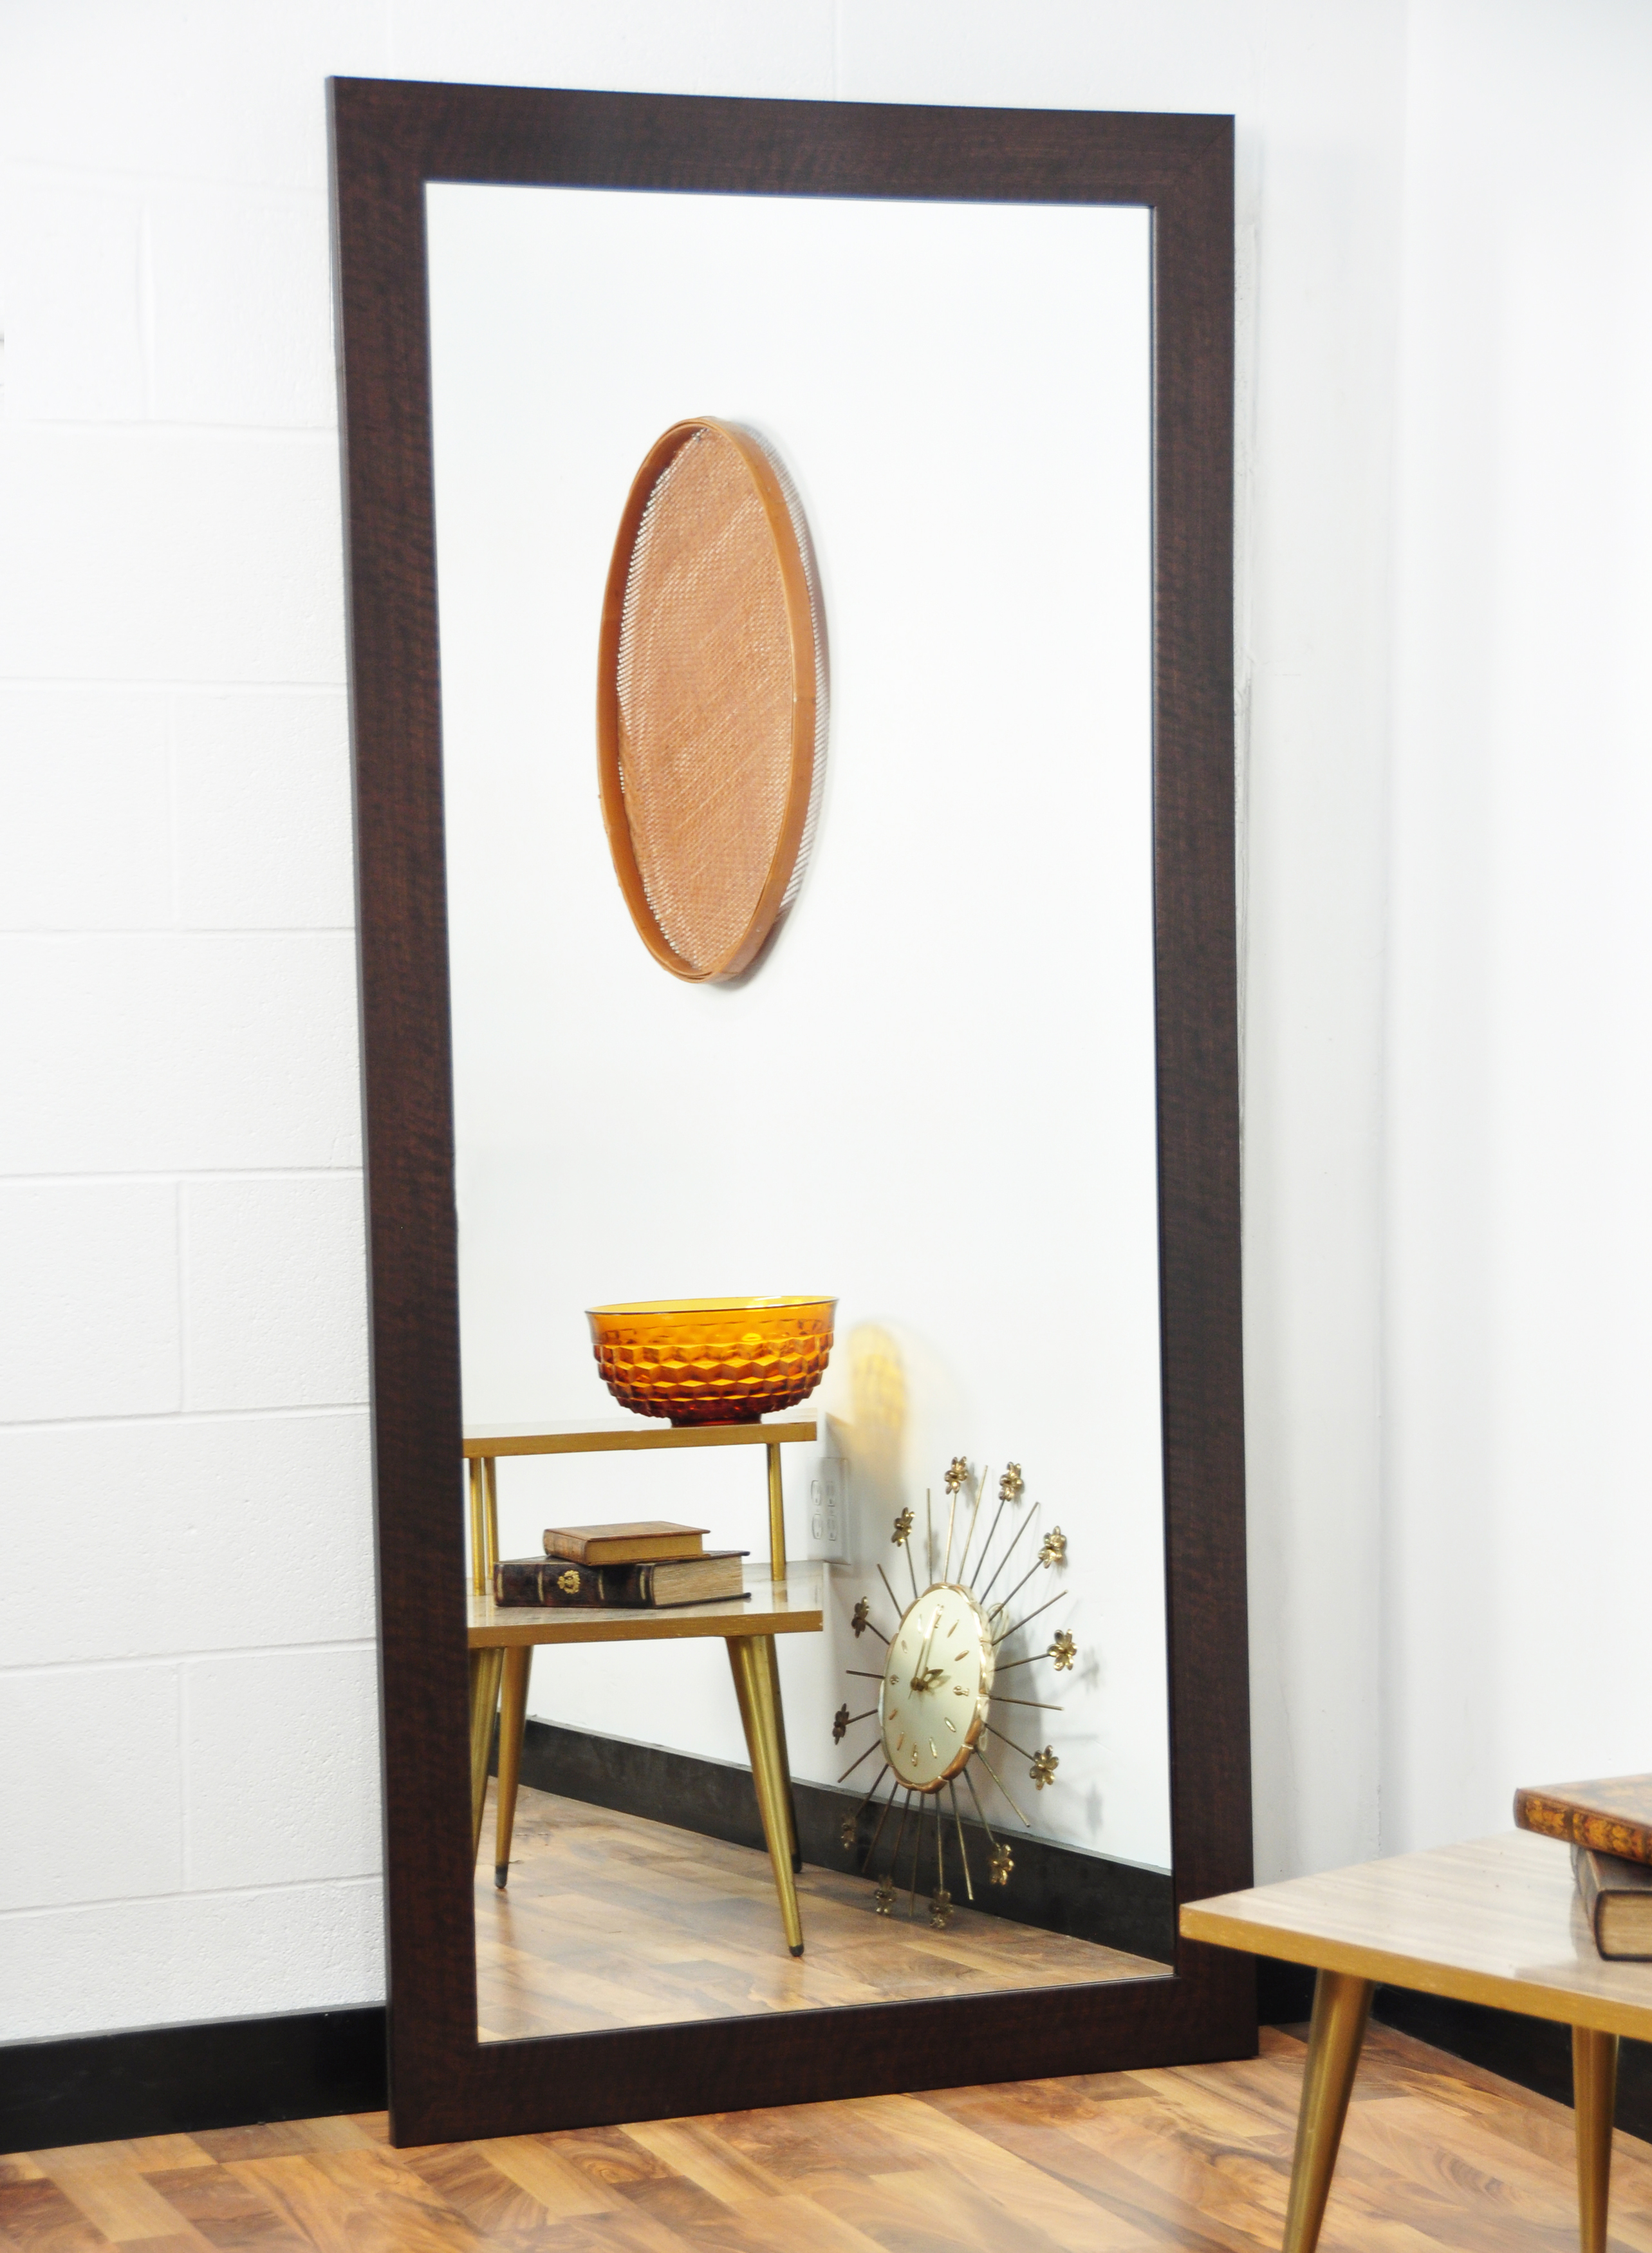 Large Leaning Floor Mirrors: Add A Refined Touch To Your Home